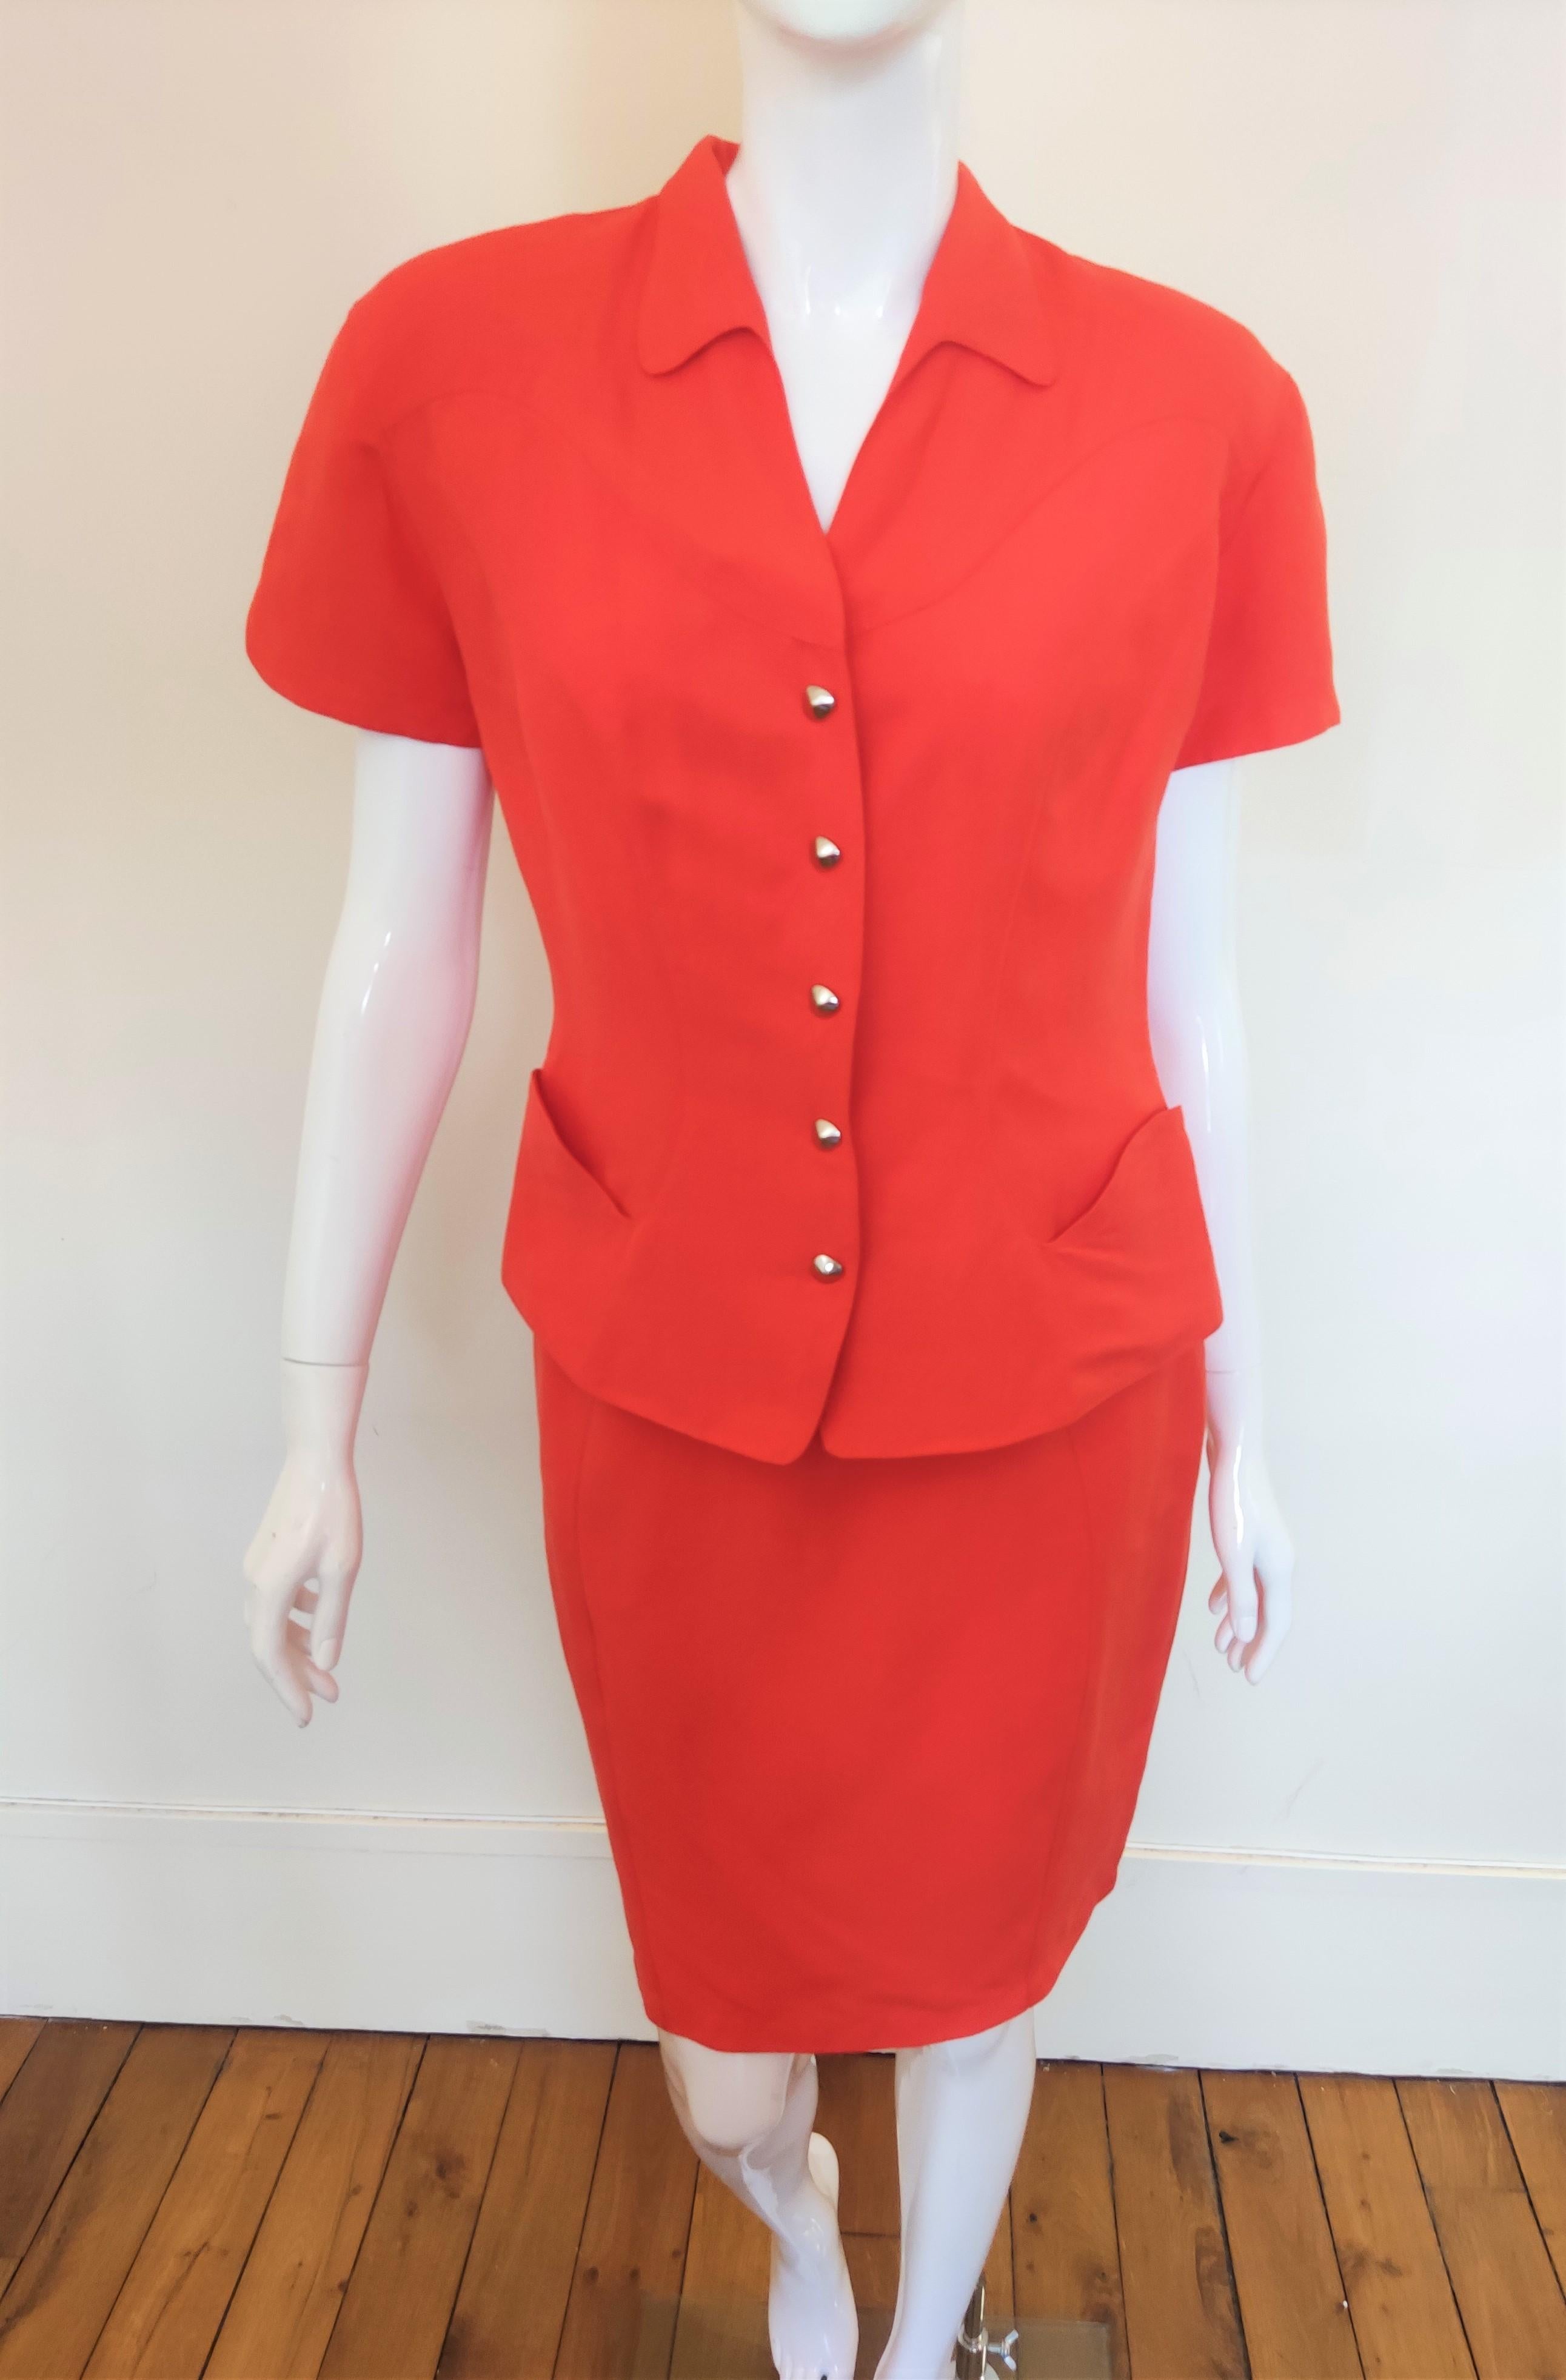 Wonderful suit by Thierry Mugler!
With shoulder pads.
Slimmed waist!
Future look with the pockets.
Color: orange. 

VERY GOOD condition! Light sign of wear inside at the neck but it is not visible when you wear it. Please, check the last